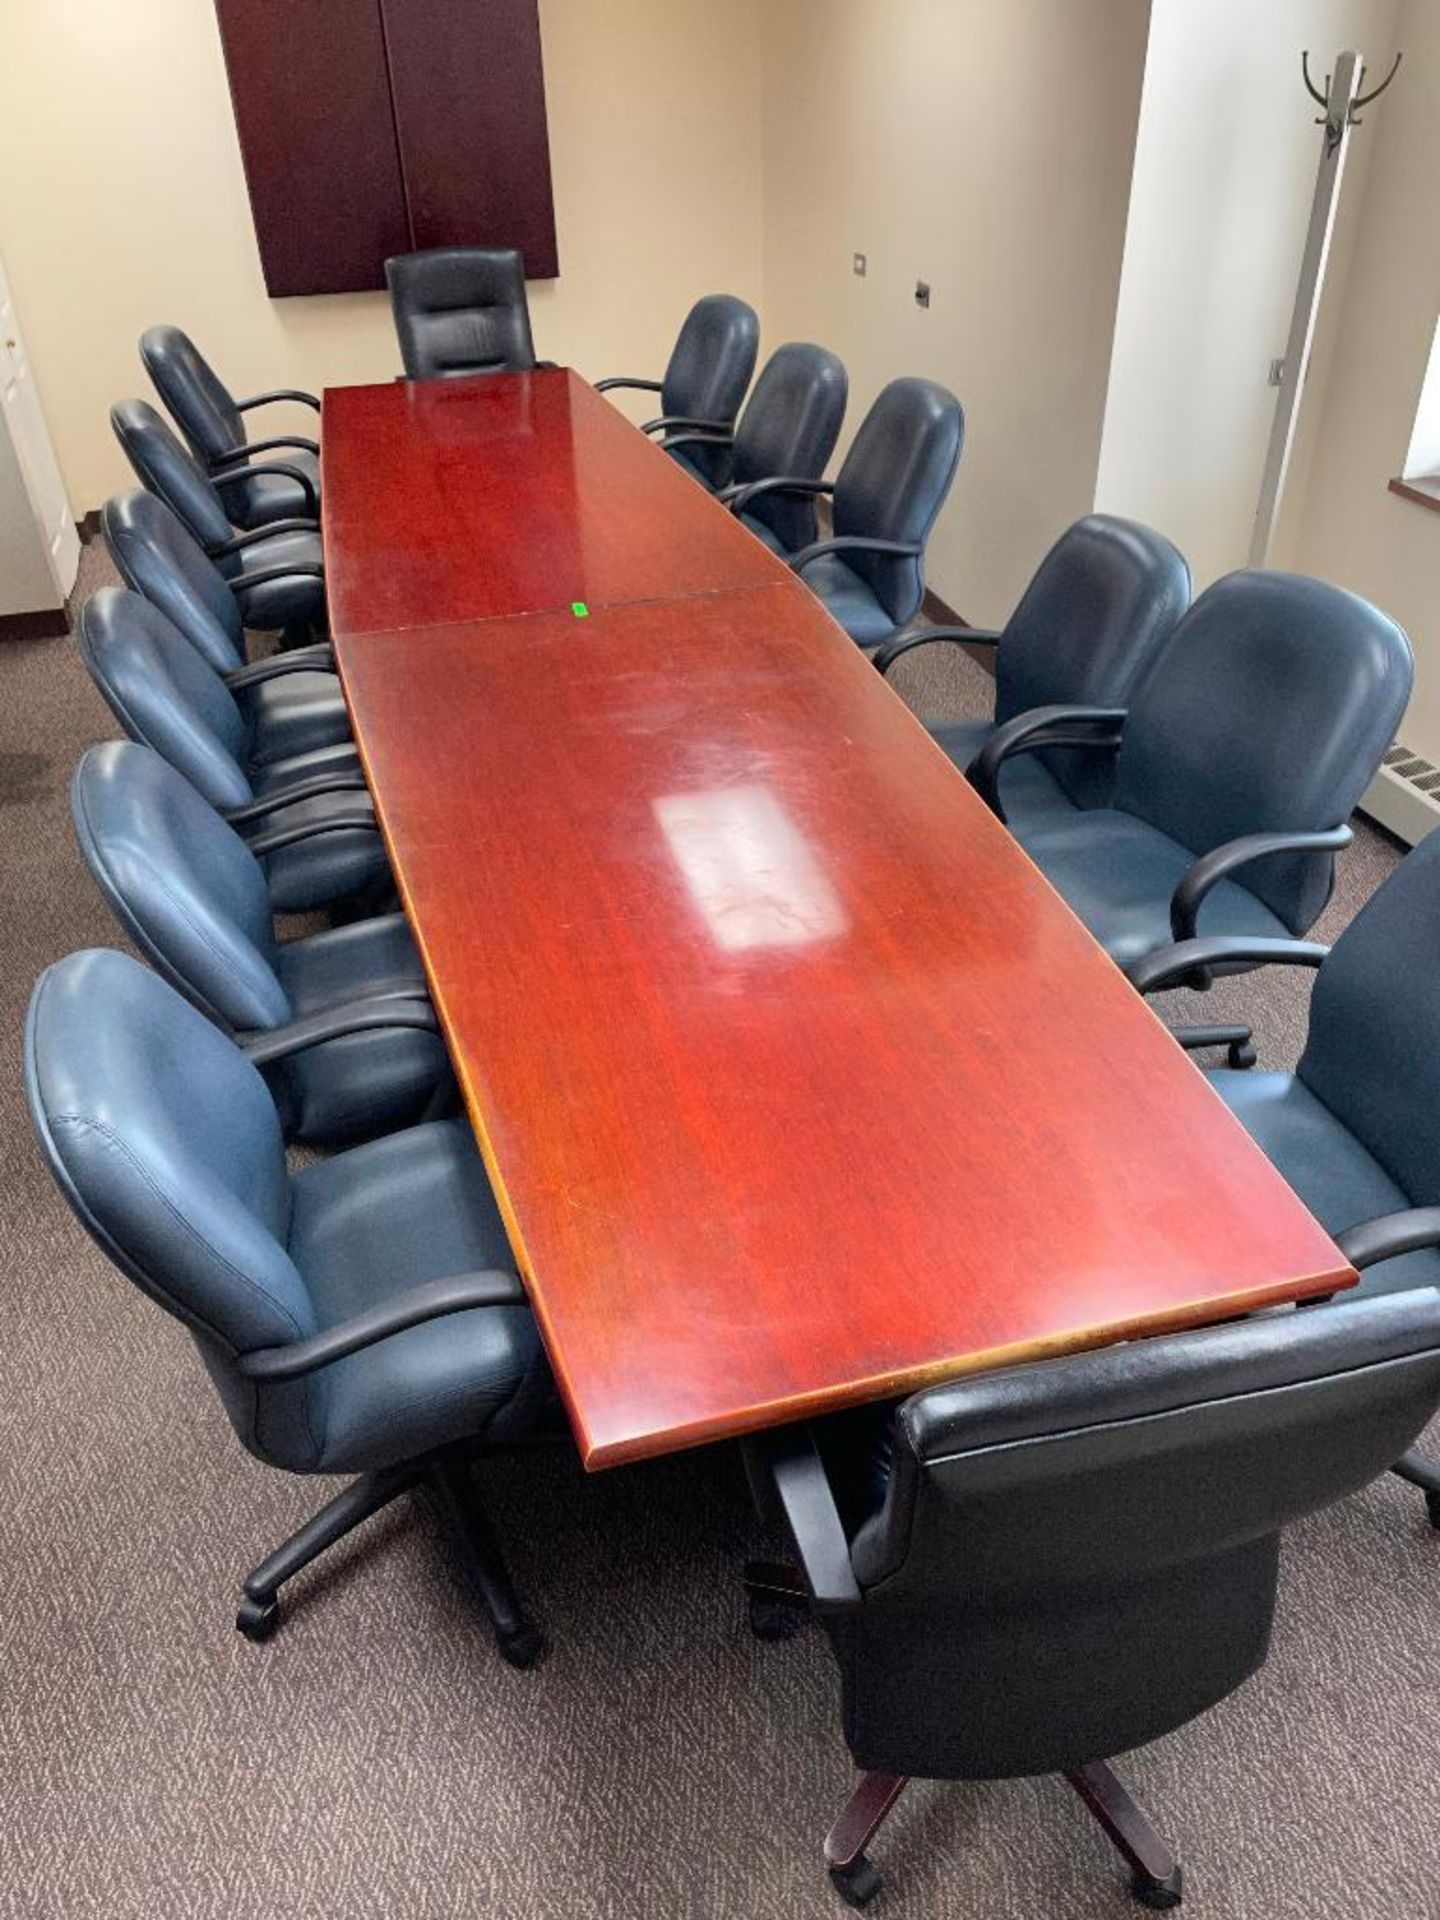 DESCRIPTION: 15 PC. COMPLETE CONFERENCE TABLE SET ADDITIONAL INFORMATION: TABLE AND 14 CHAIRS INCLUD - Image 4 of 6